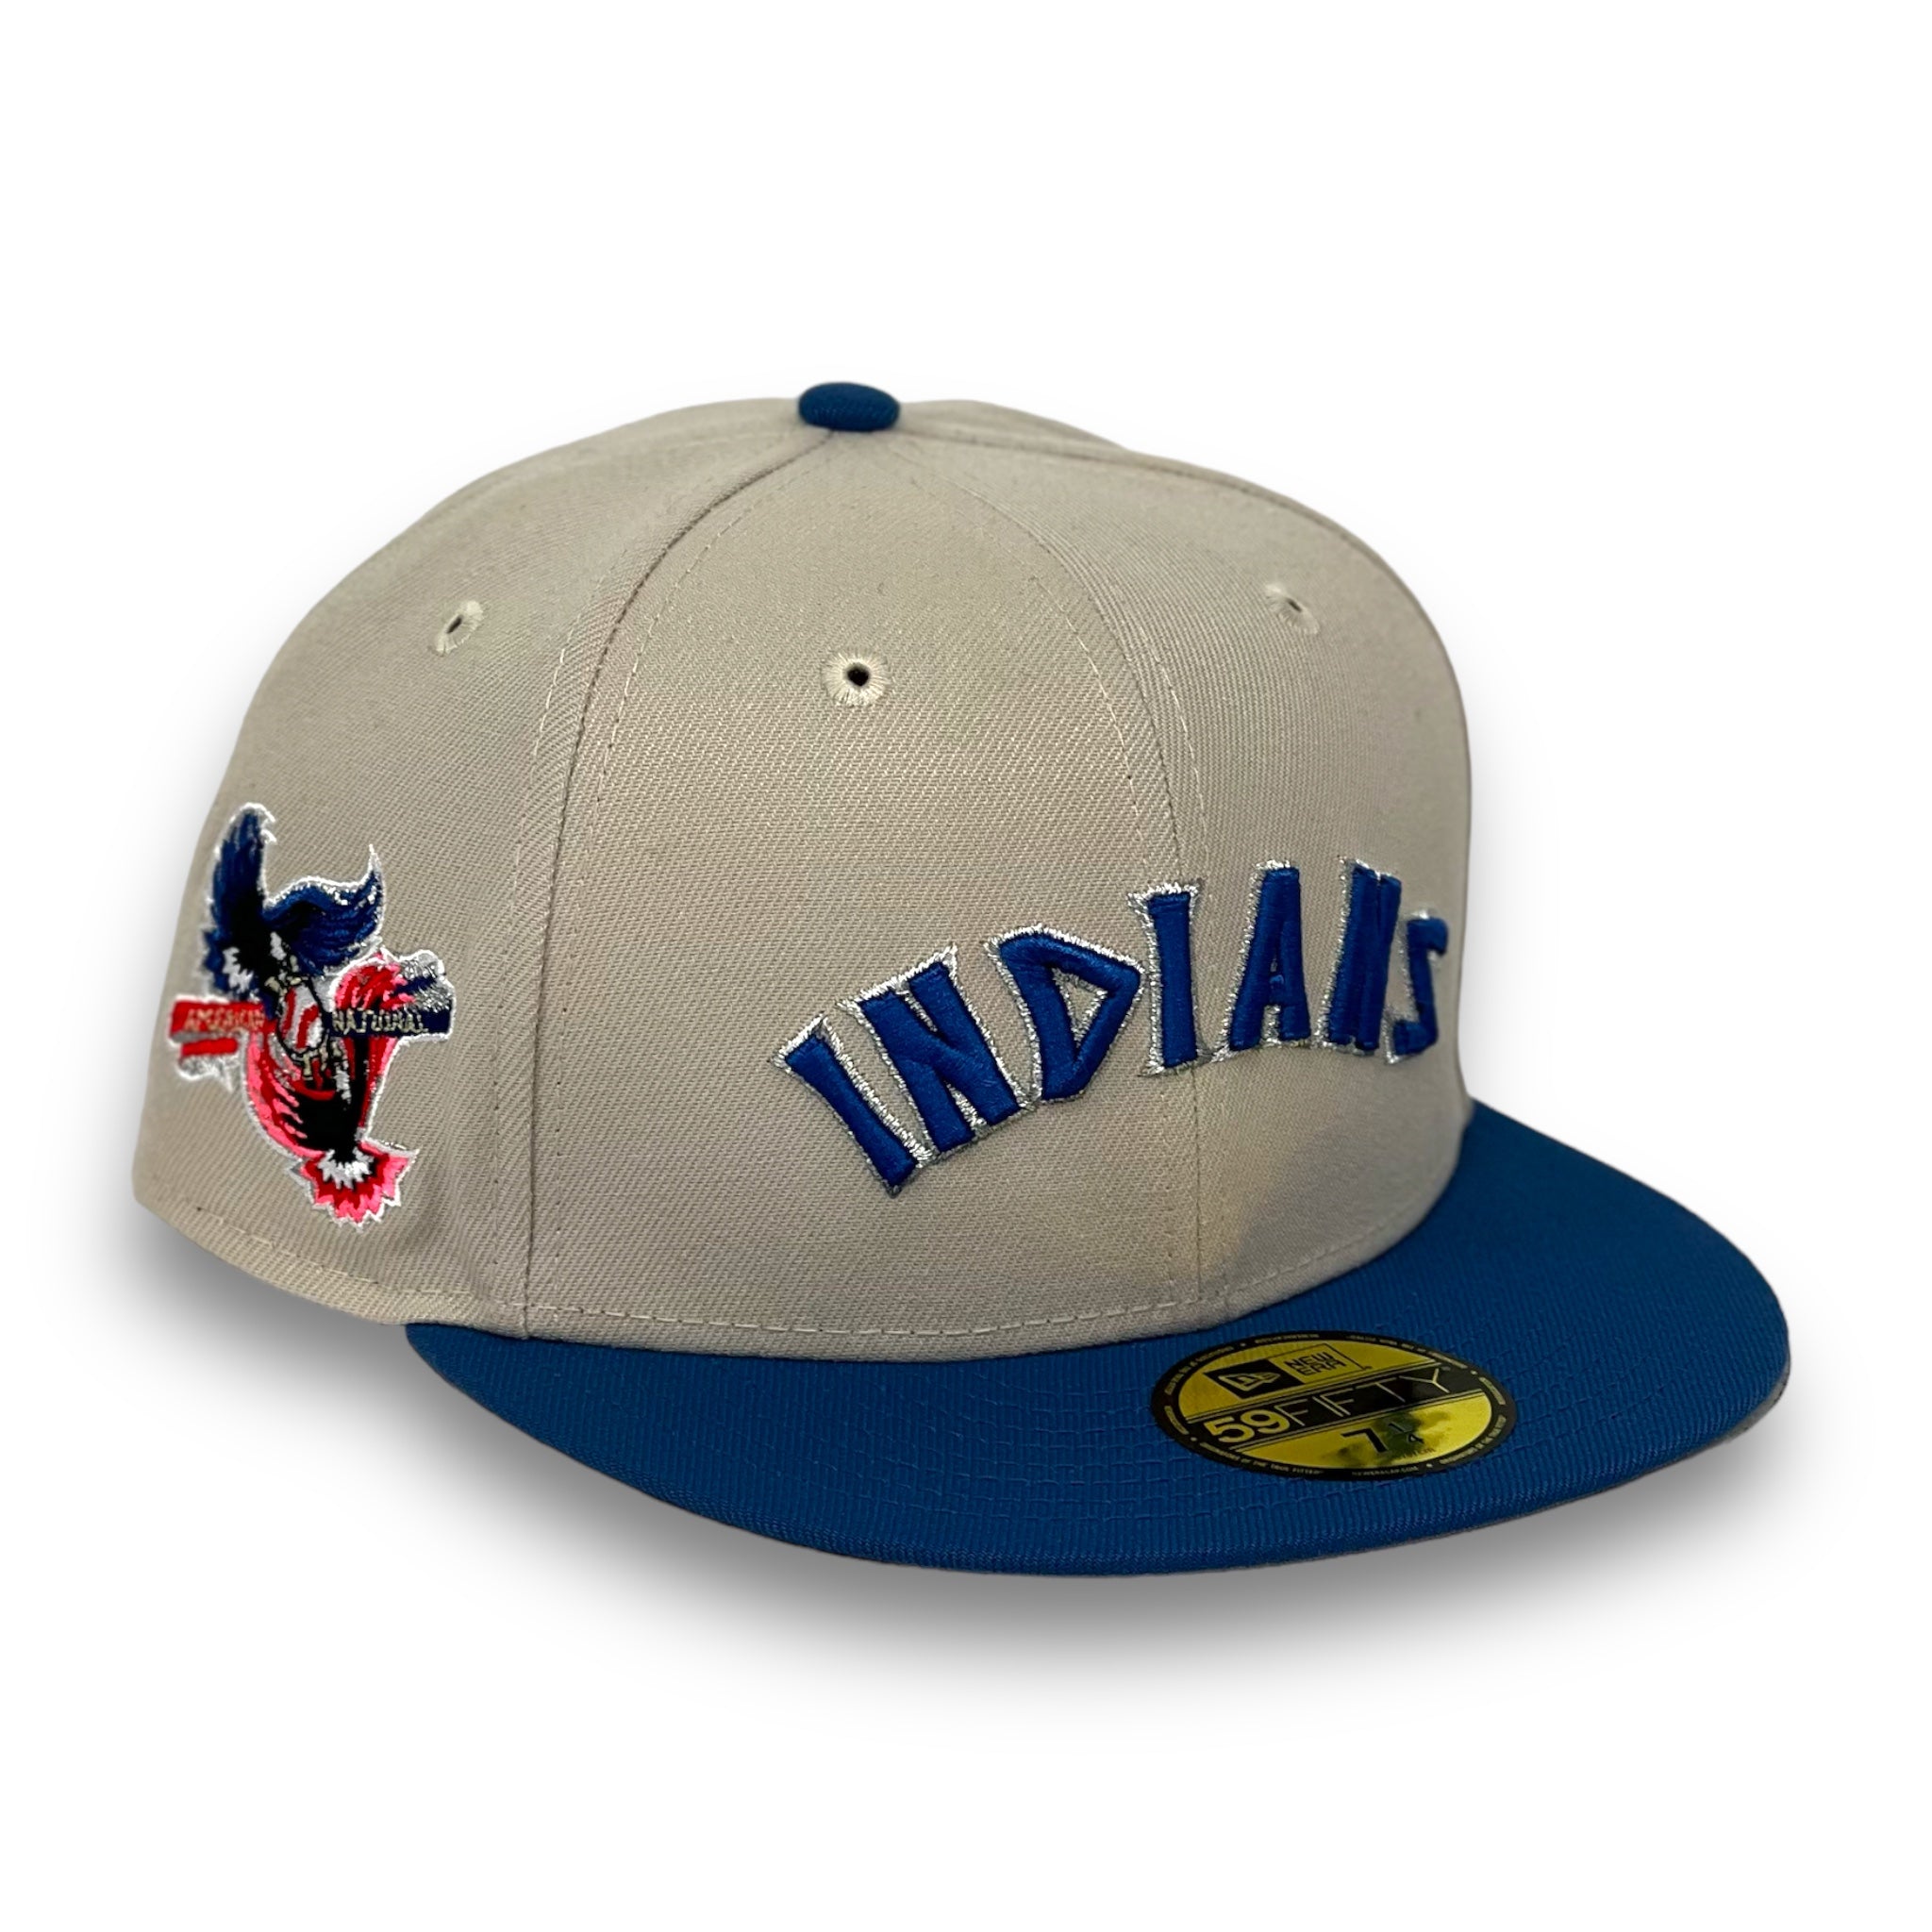 CLEVELAND INDIANS (STONE) (INTERLEAGUE LOGO) NEW ERA 59FIFTY FITTED